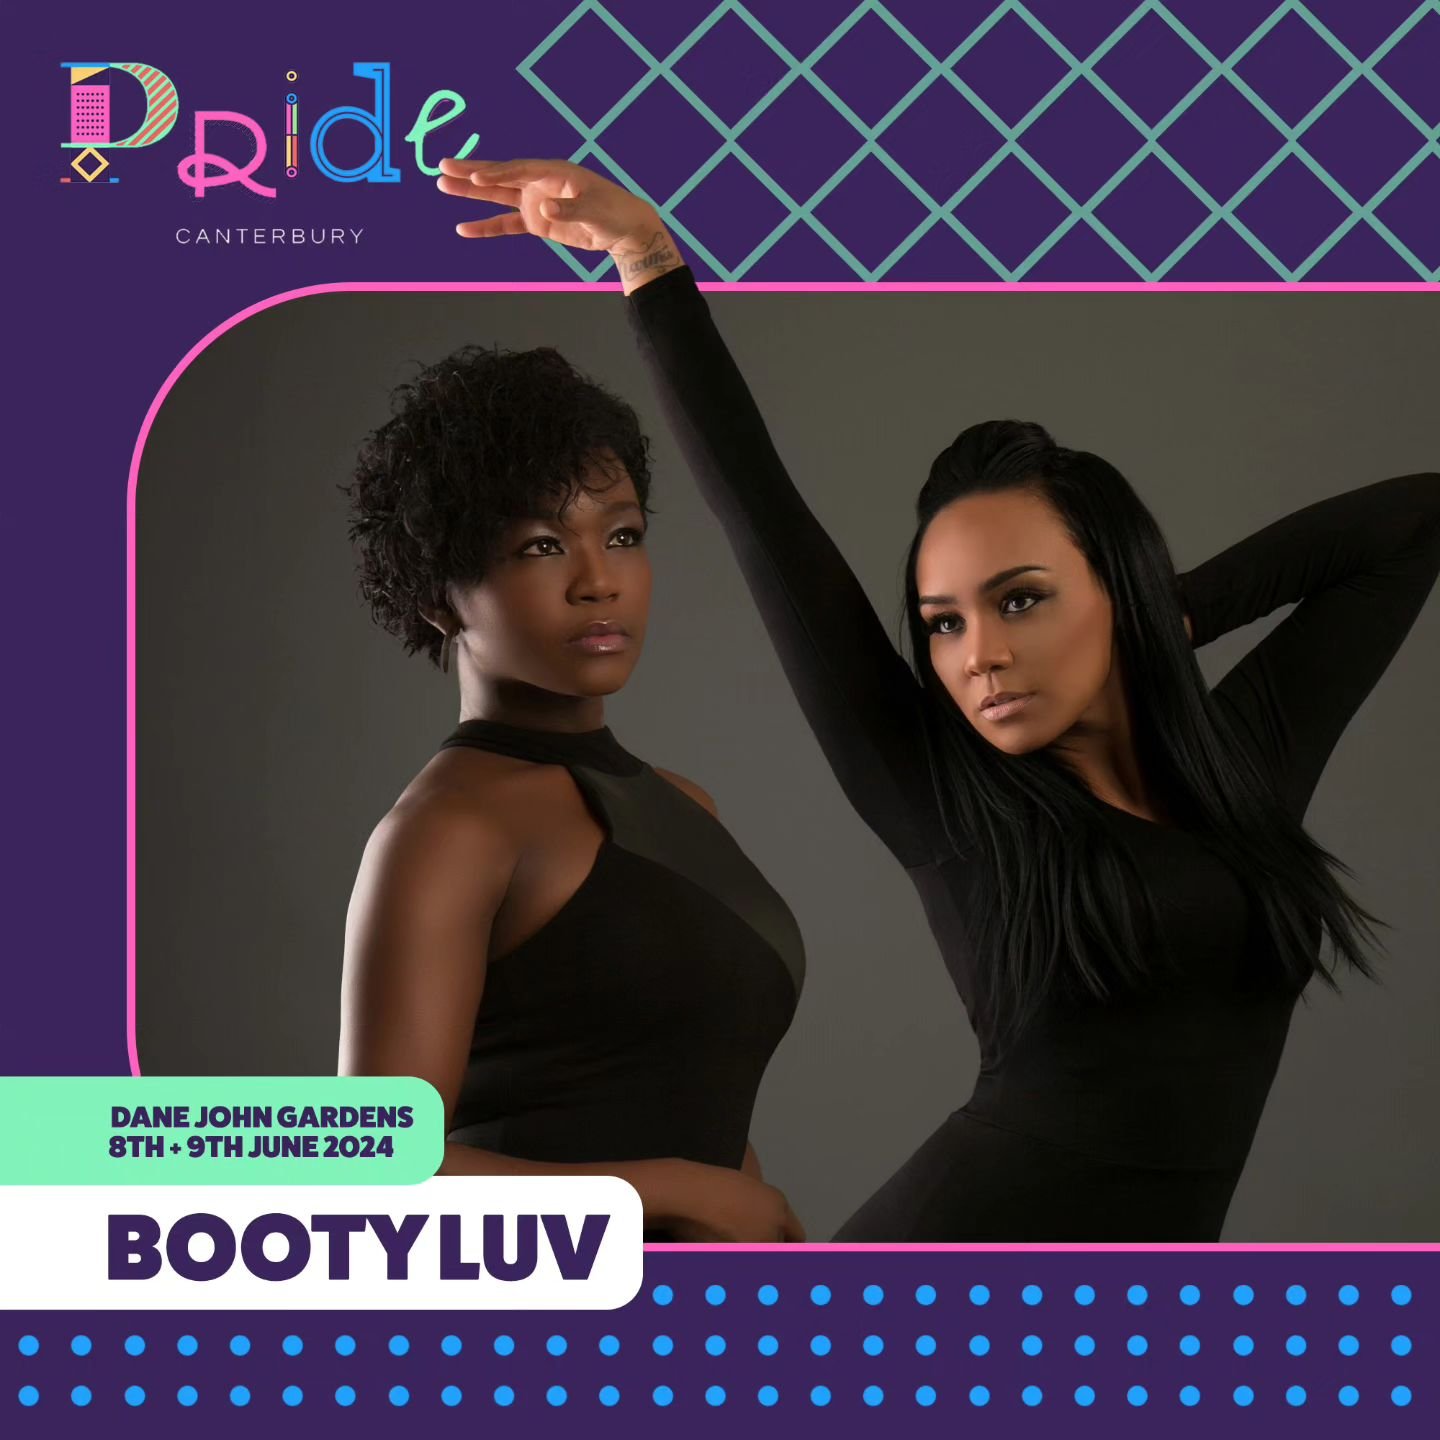 📢 Pride Canterbury line-up announcement 

Booty Luv the 00s pop legends will be joining our main stage this June!

#pridecanterbury #pride #canterbury